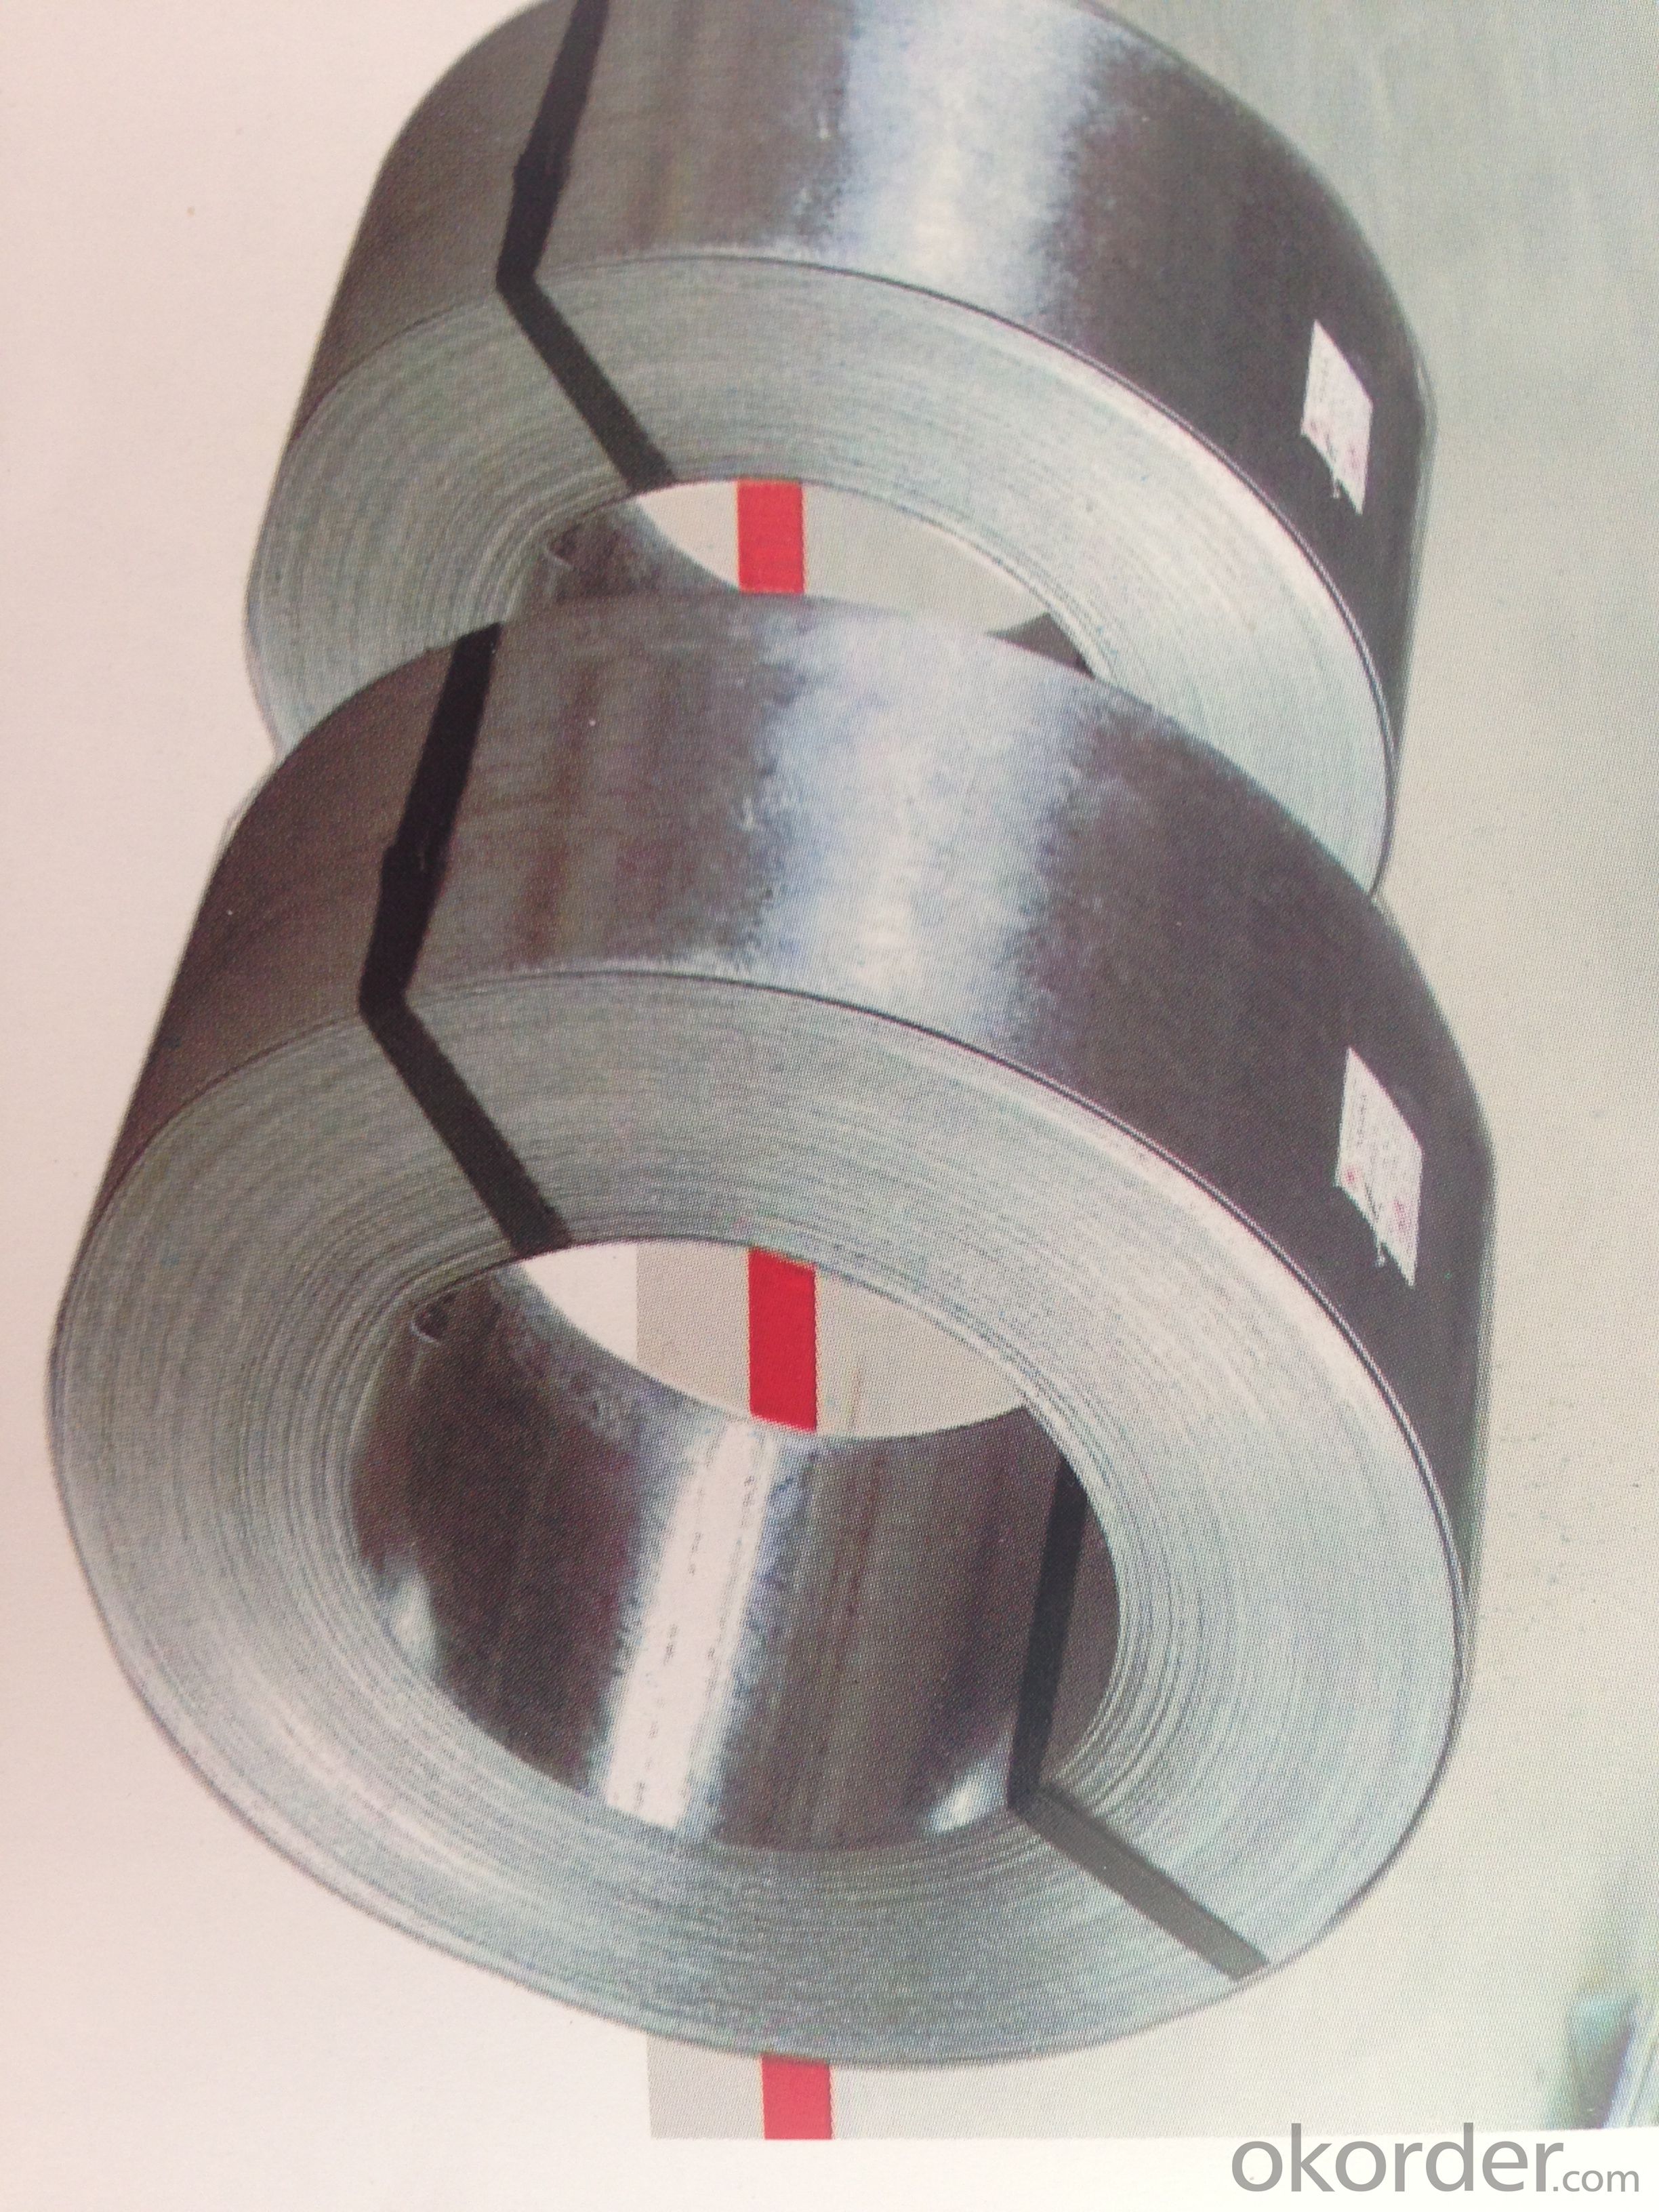 Hot dipped galvanized steel strips